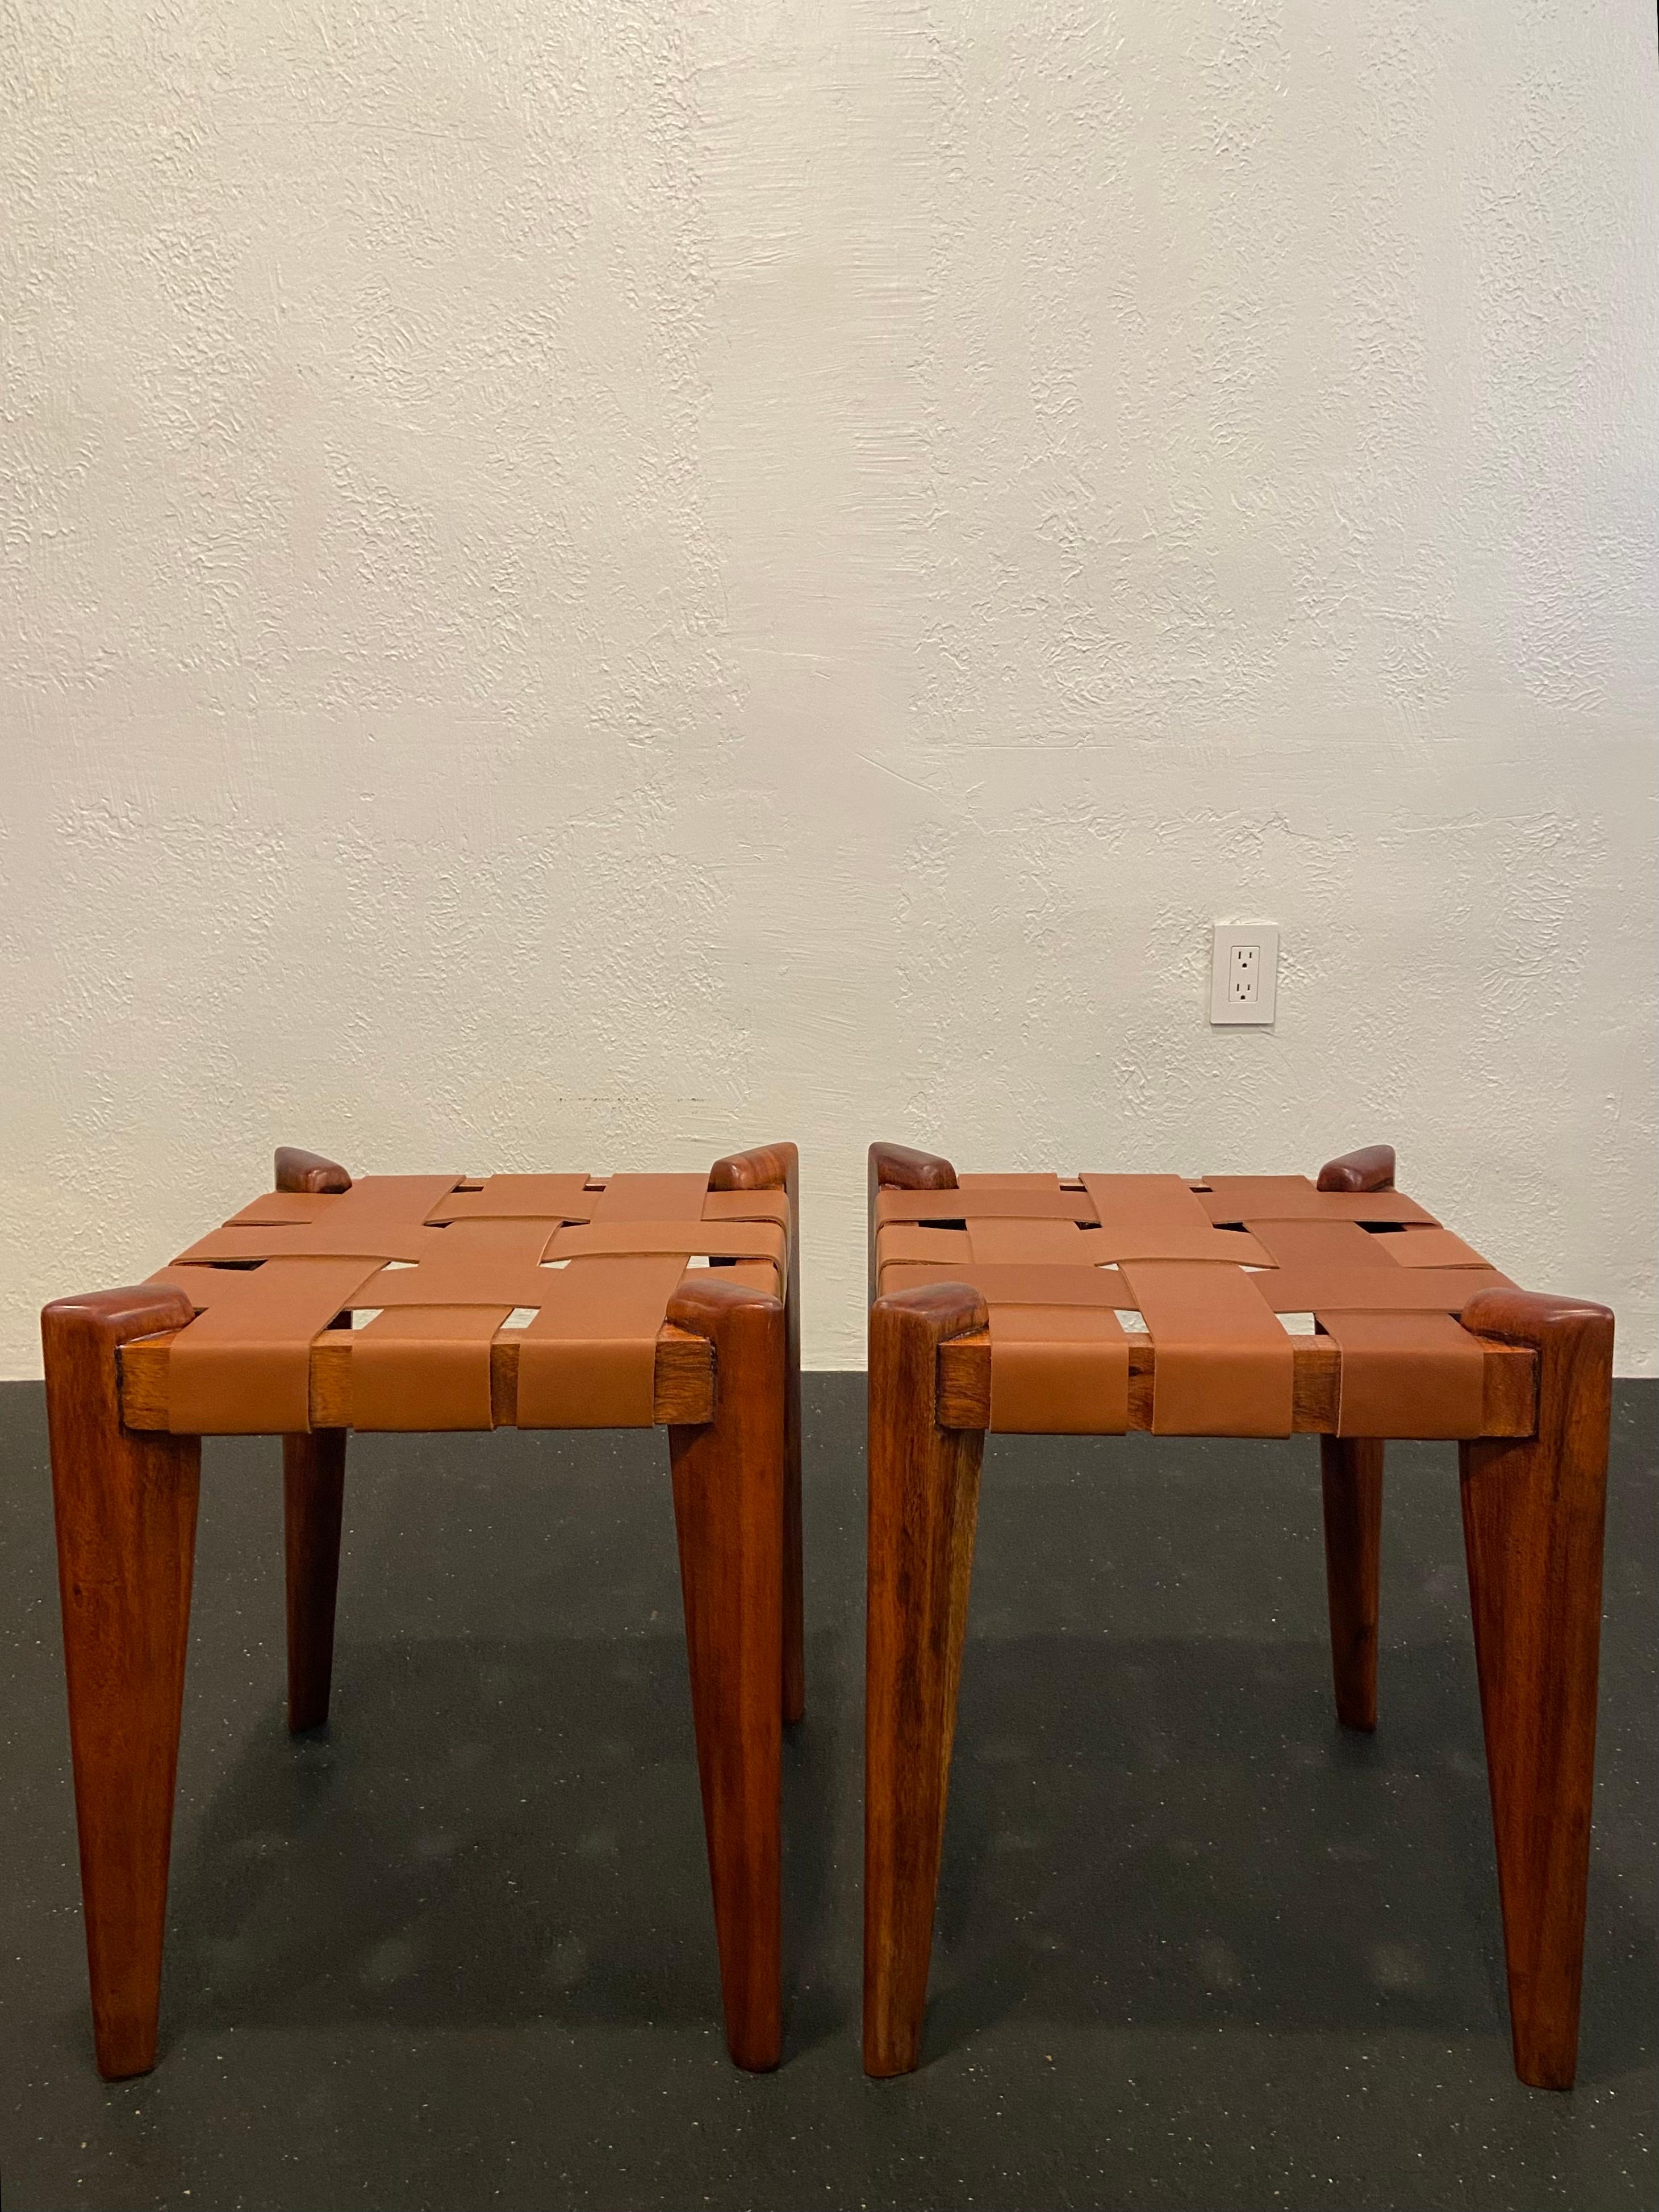 Edmond Spence Woven Leather Stools-a Pair For Sale 7